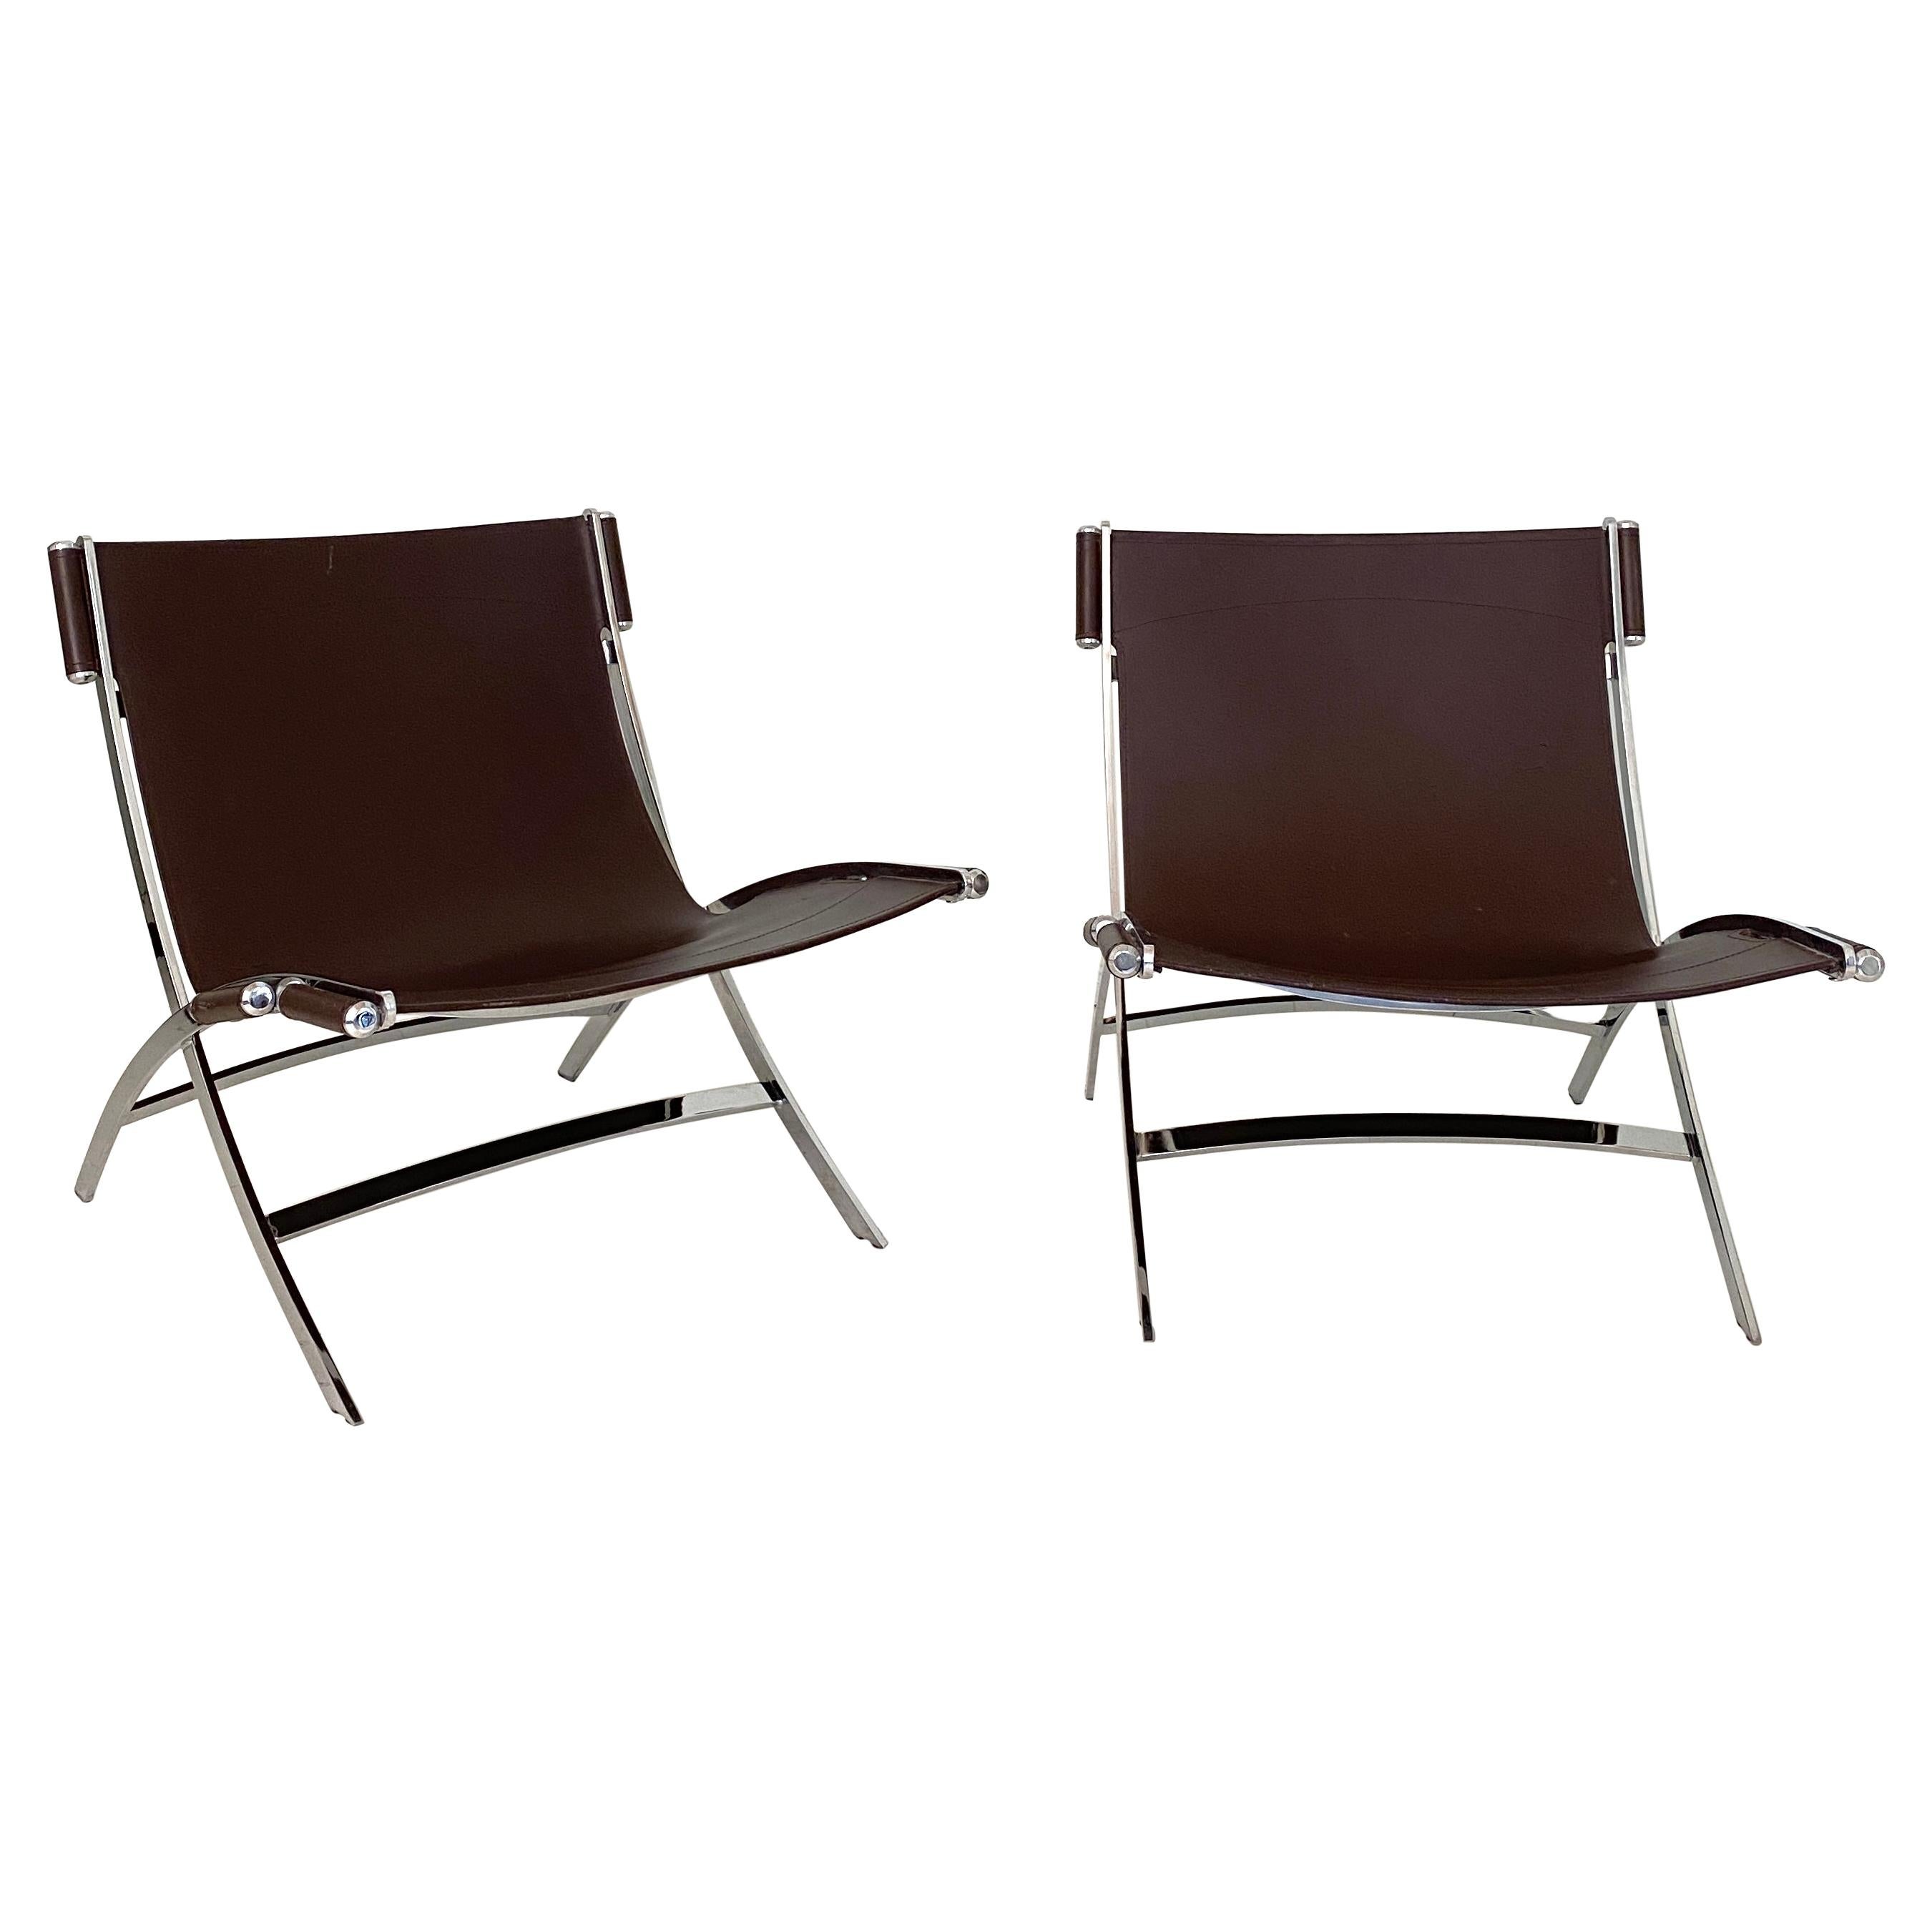 Pair of Lounge Chairs by Antonio Citterio in Chrome and Leather for Flexform